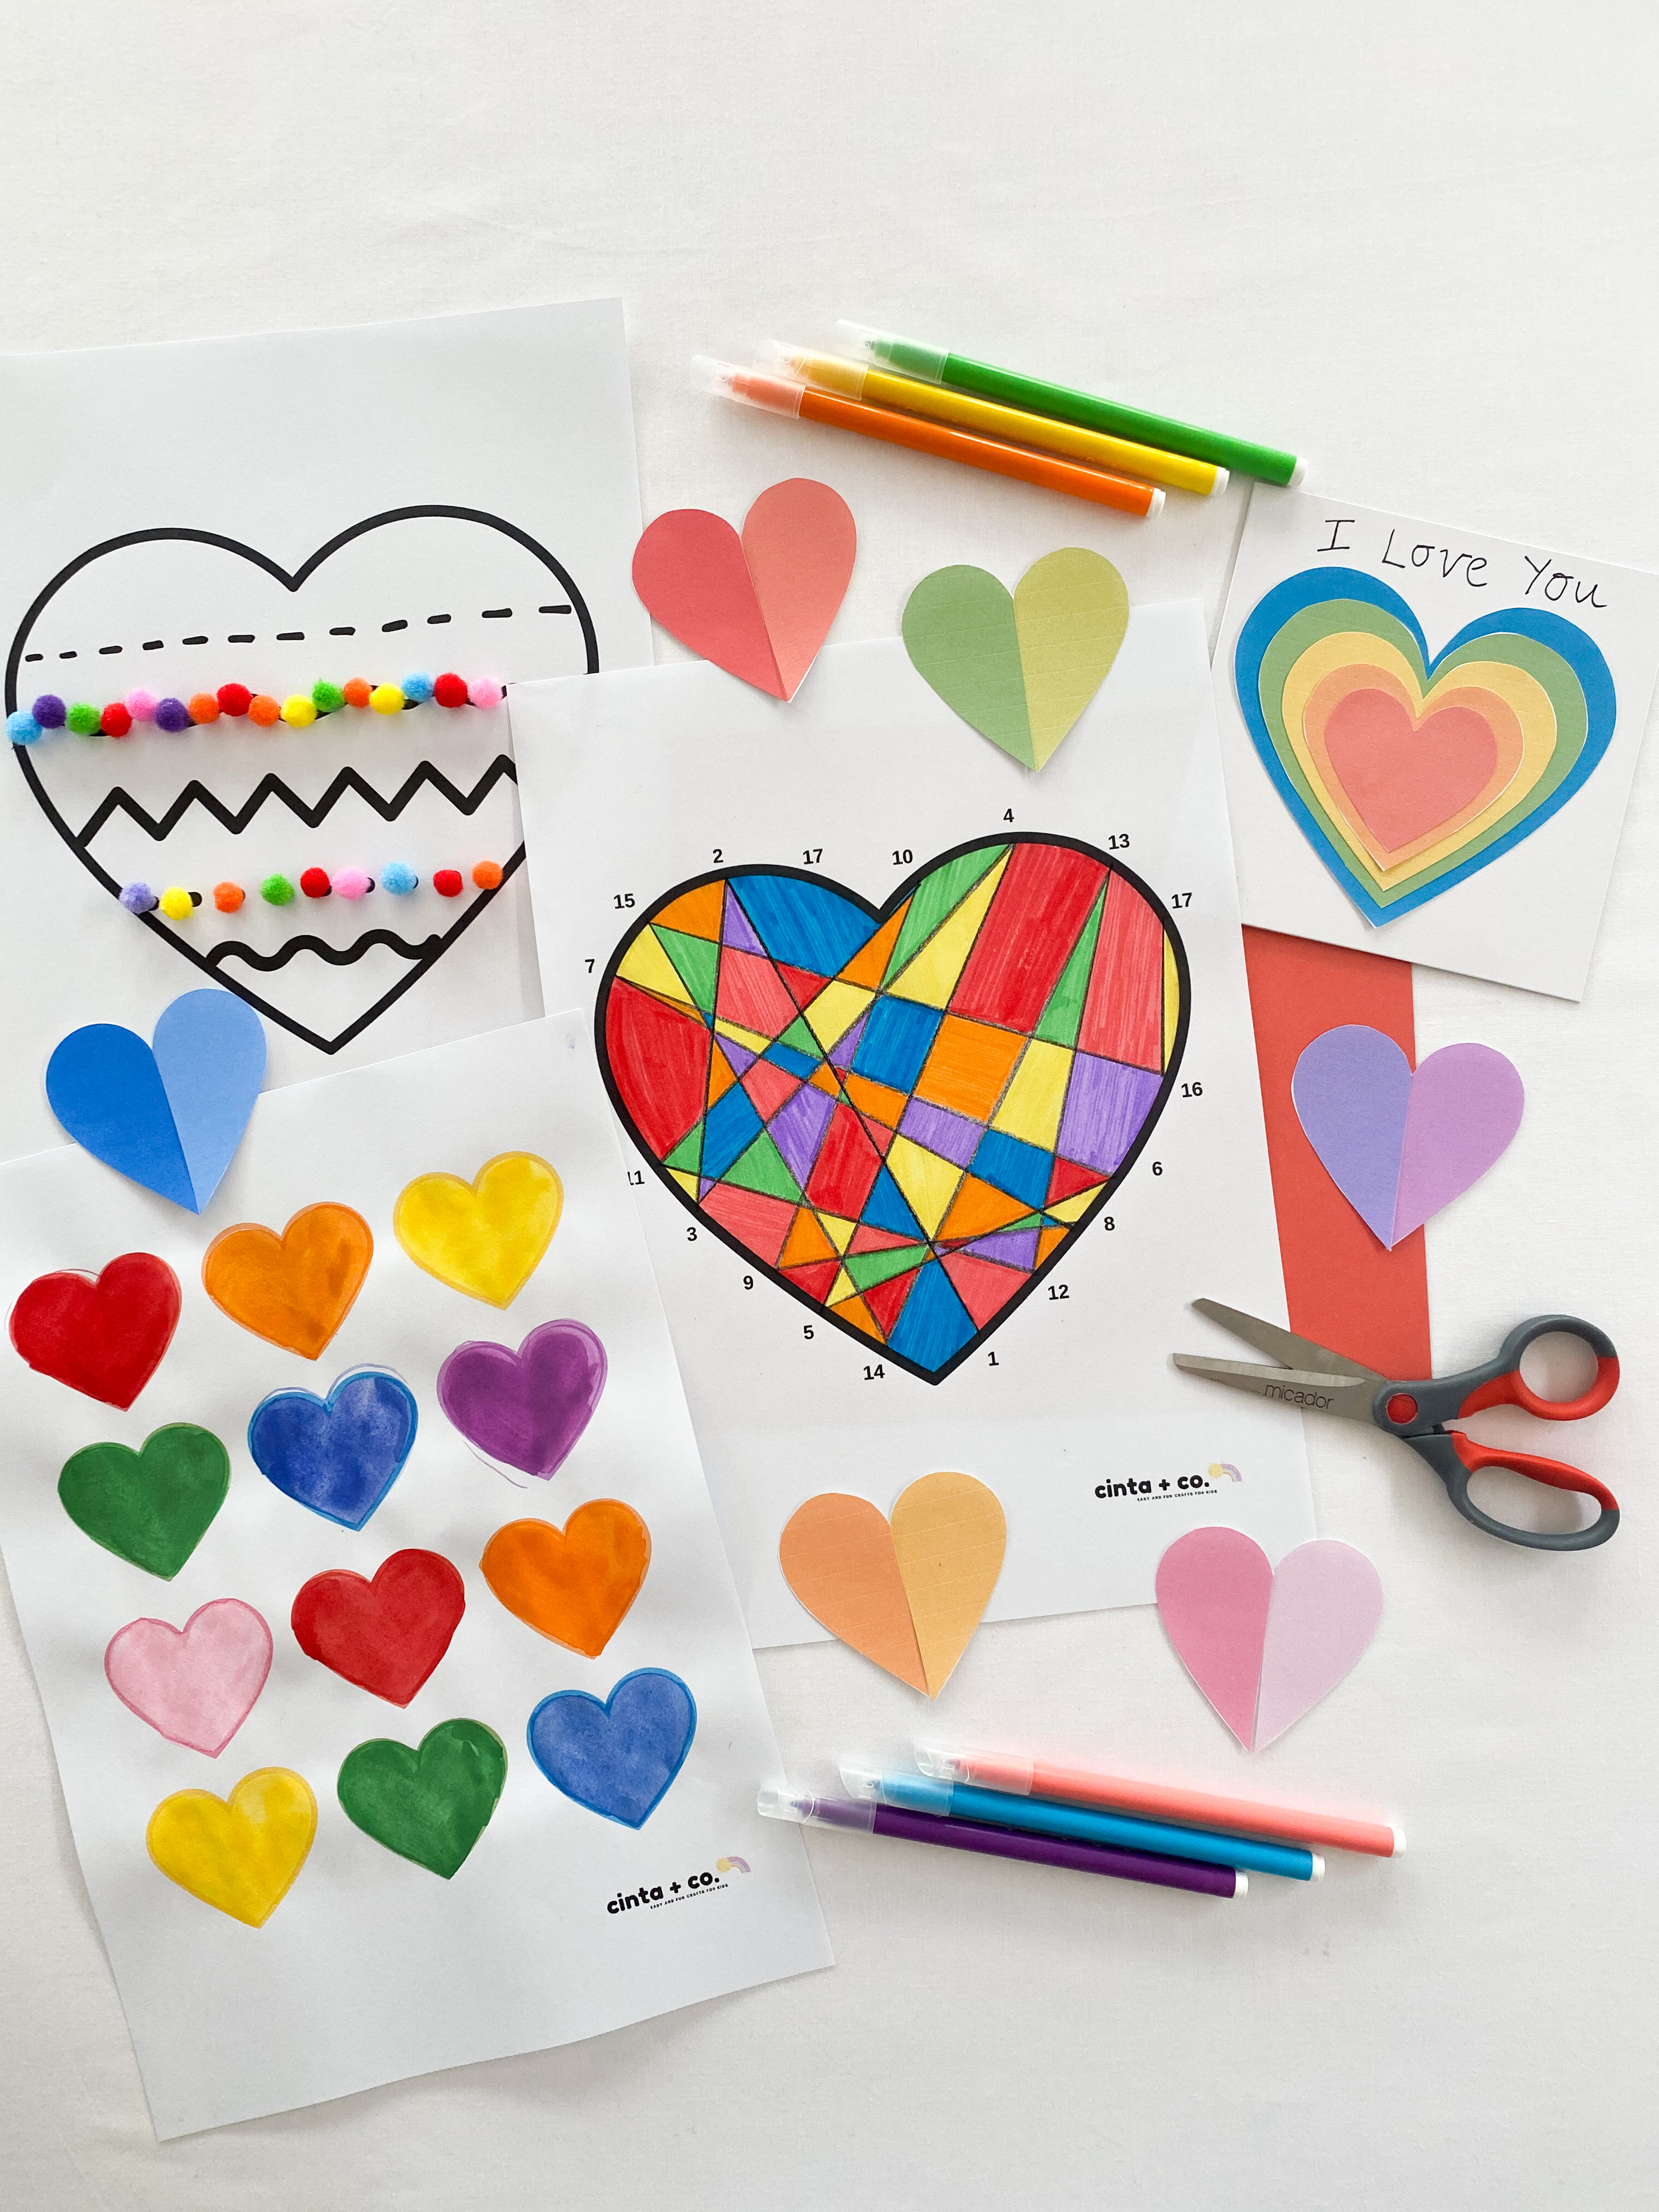 My Top 5 Easy Valentine's Day Crafts for Kids